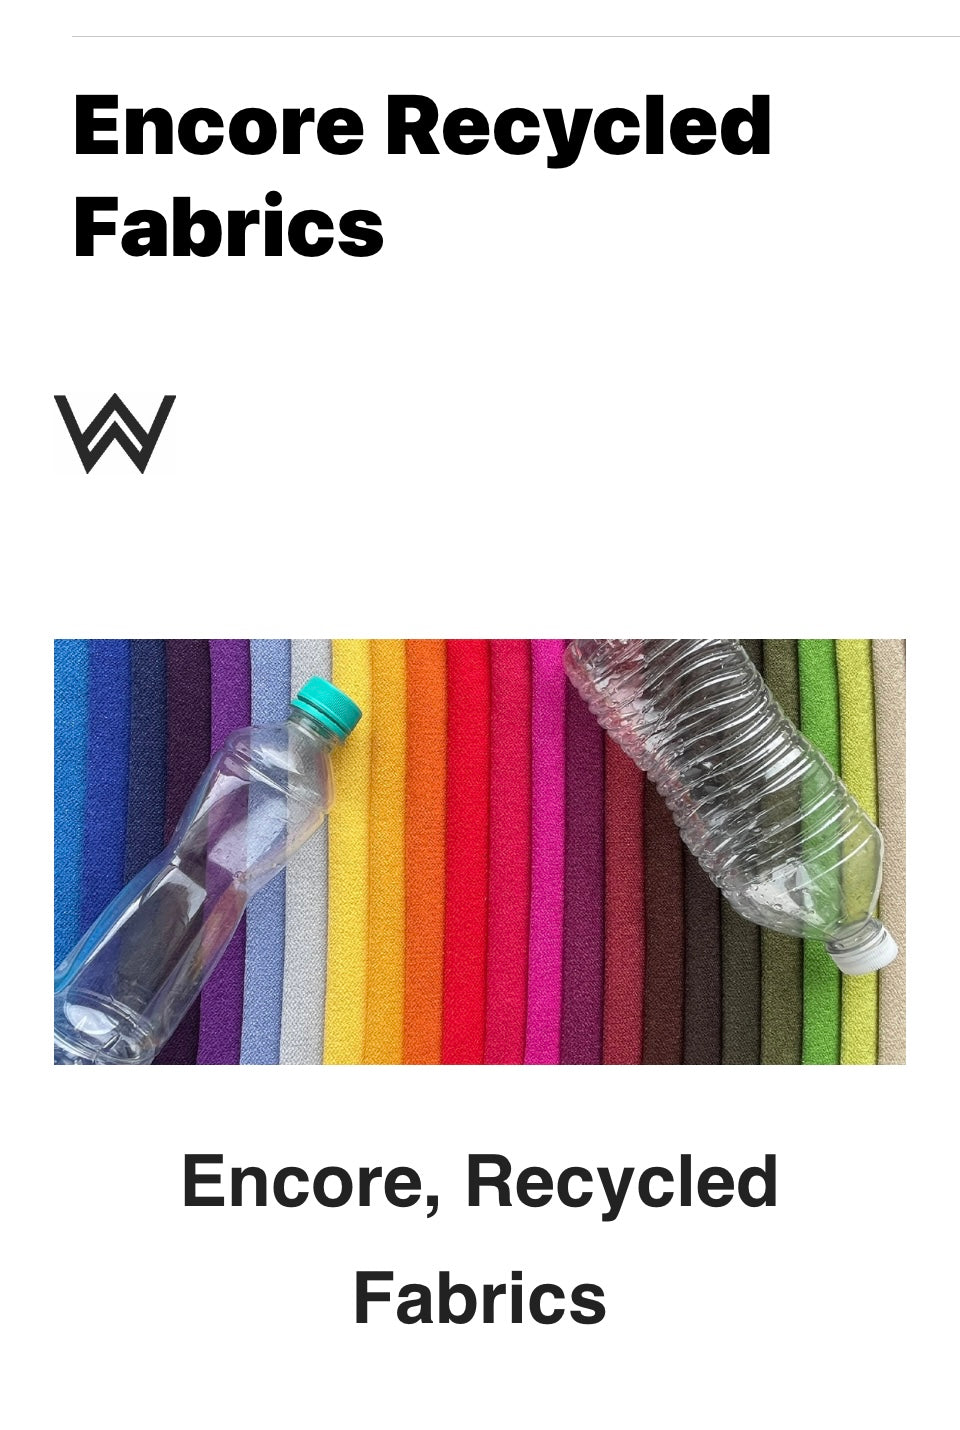 Sustainable Textile Solutions